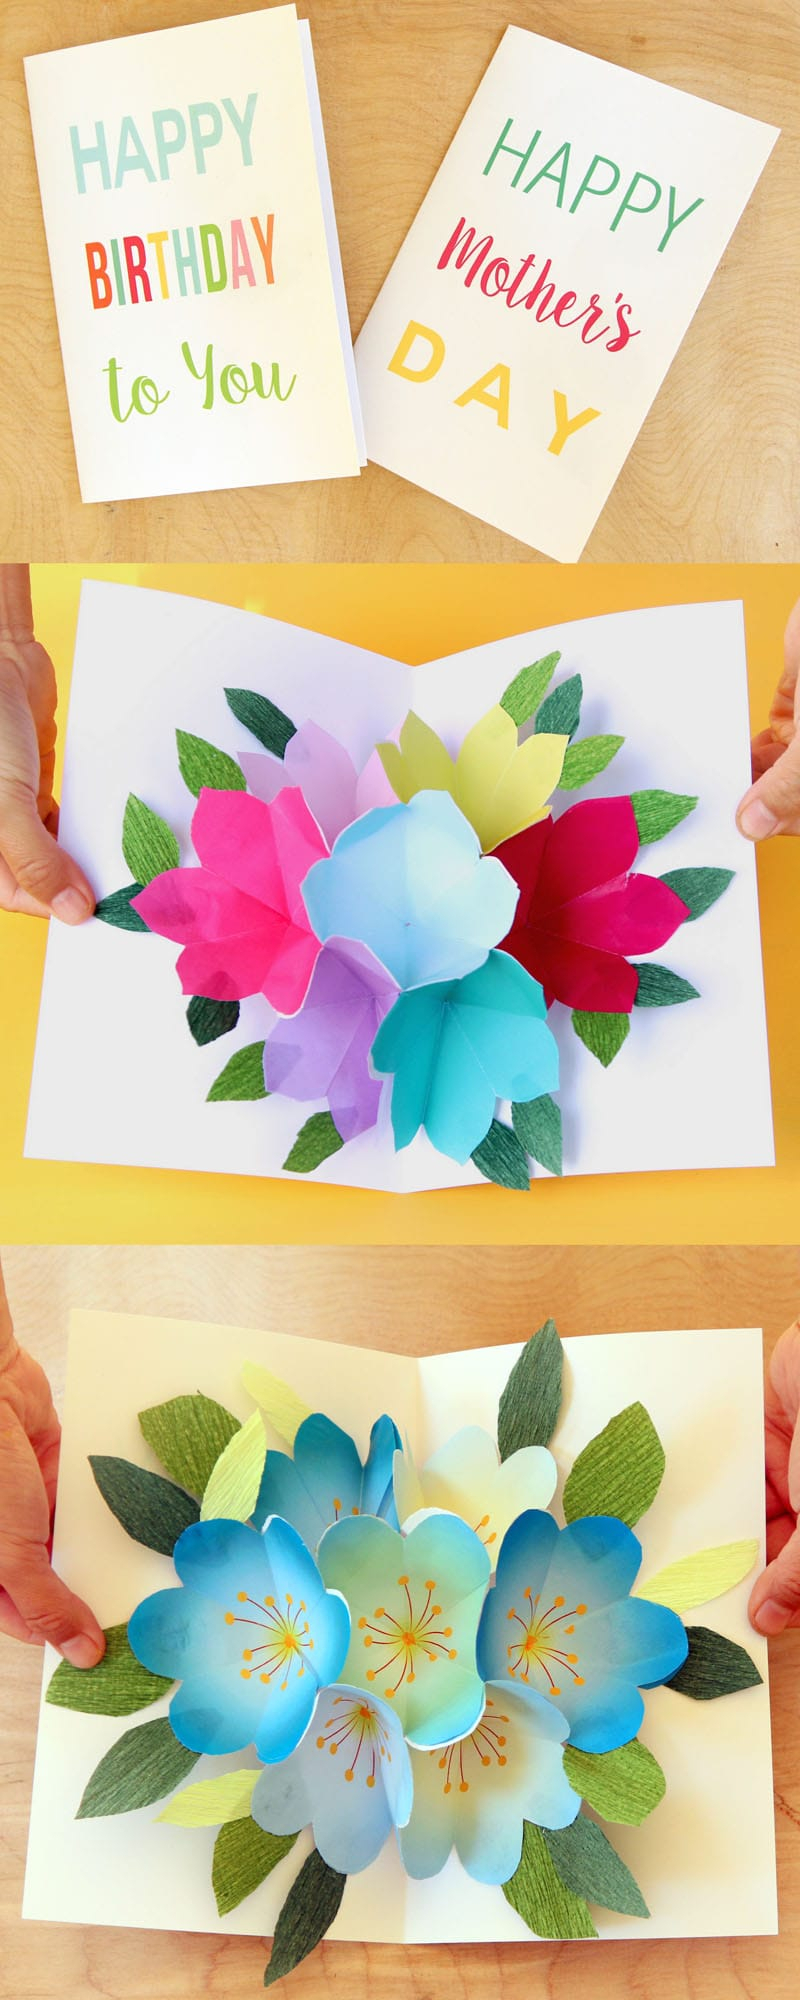 Free Printable Happy Birthday Card With Pop Up Bouquet – A Intended For Free Printable Pop Up Card Templates